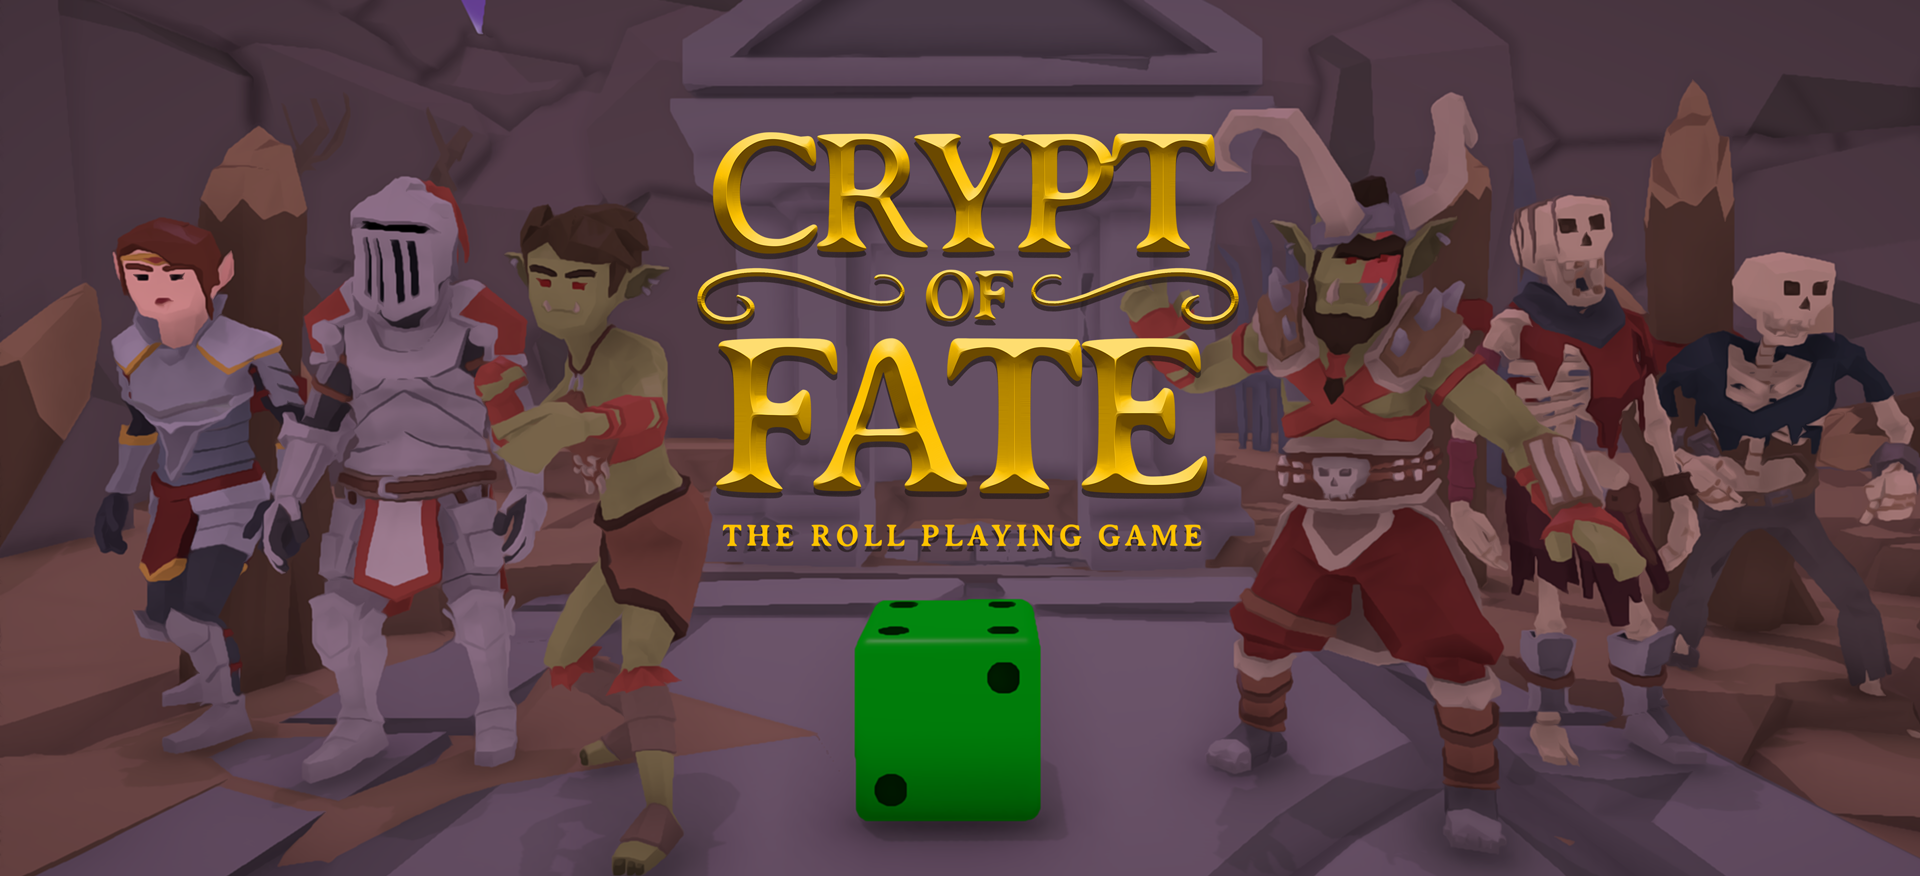 CRYPT of FATE - the roll playing game